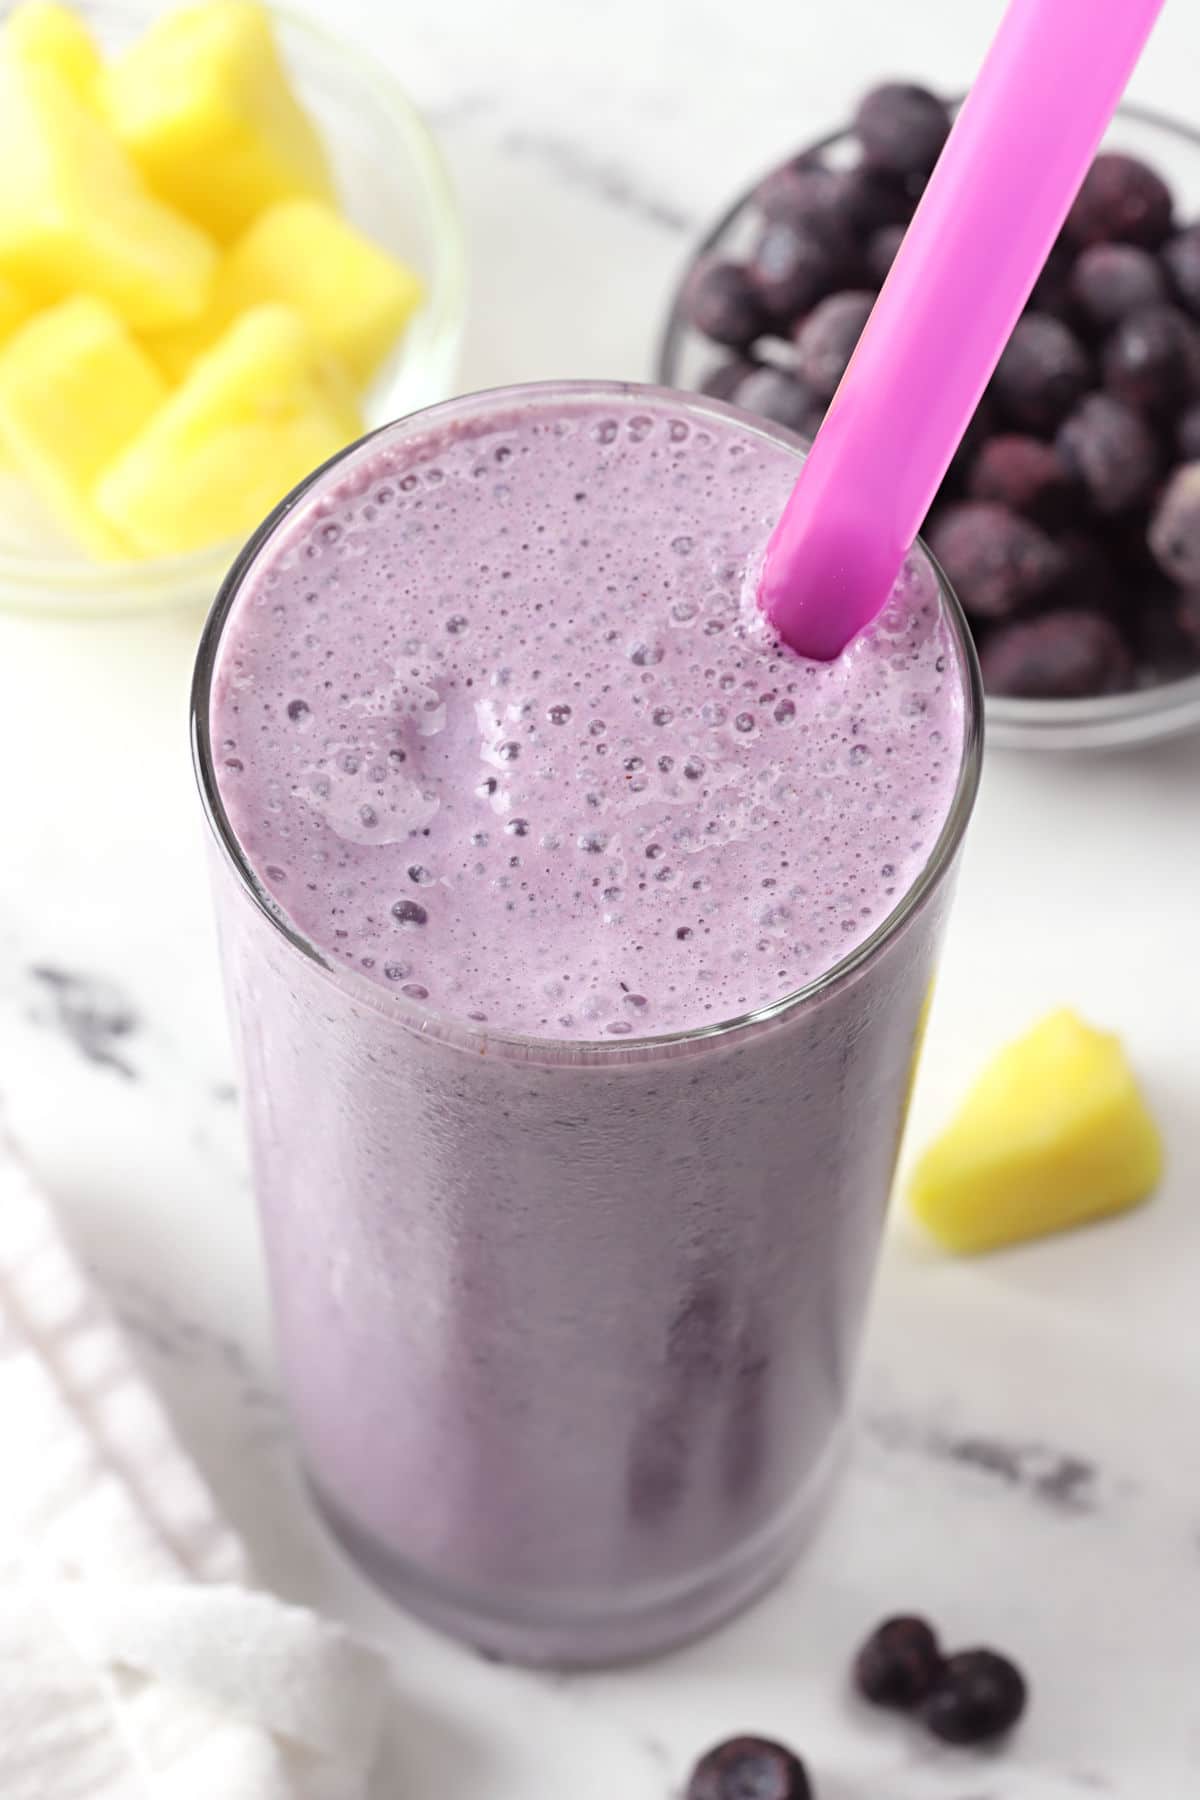 A purple smoothie in a glass with a purple straw.